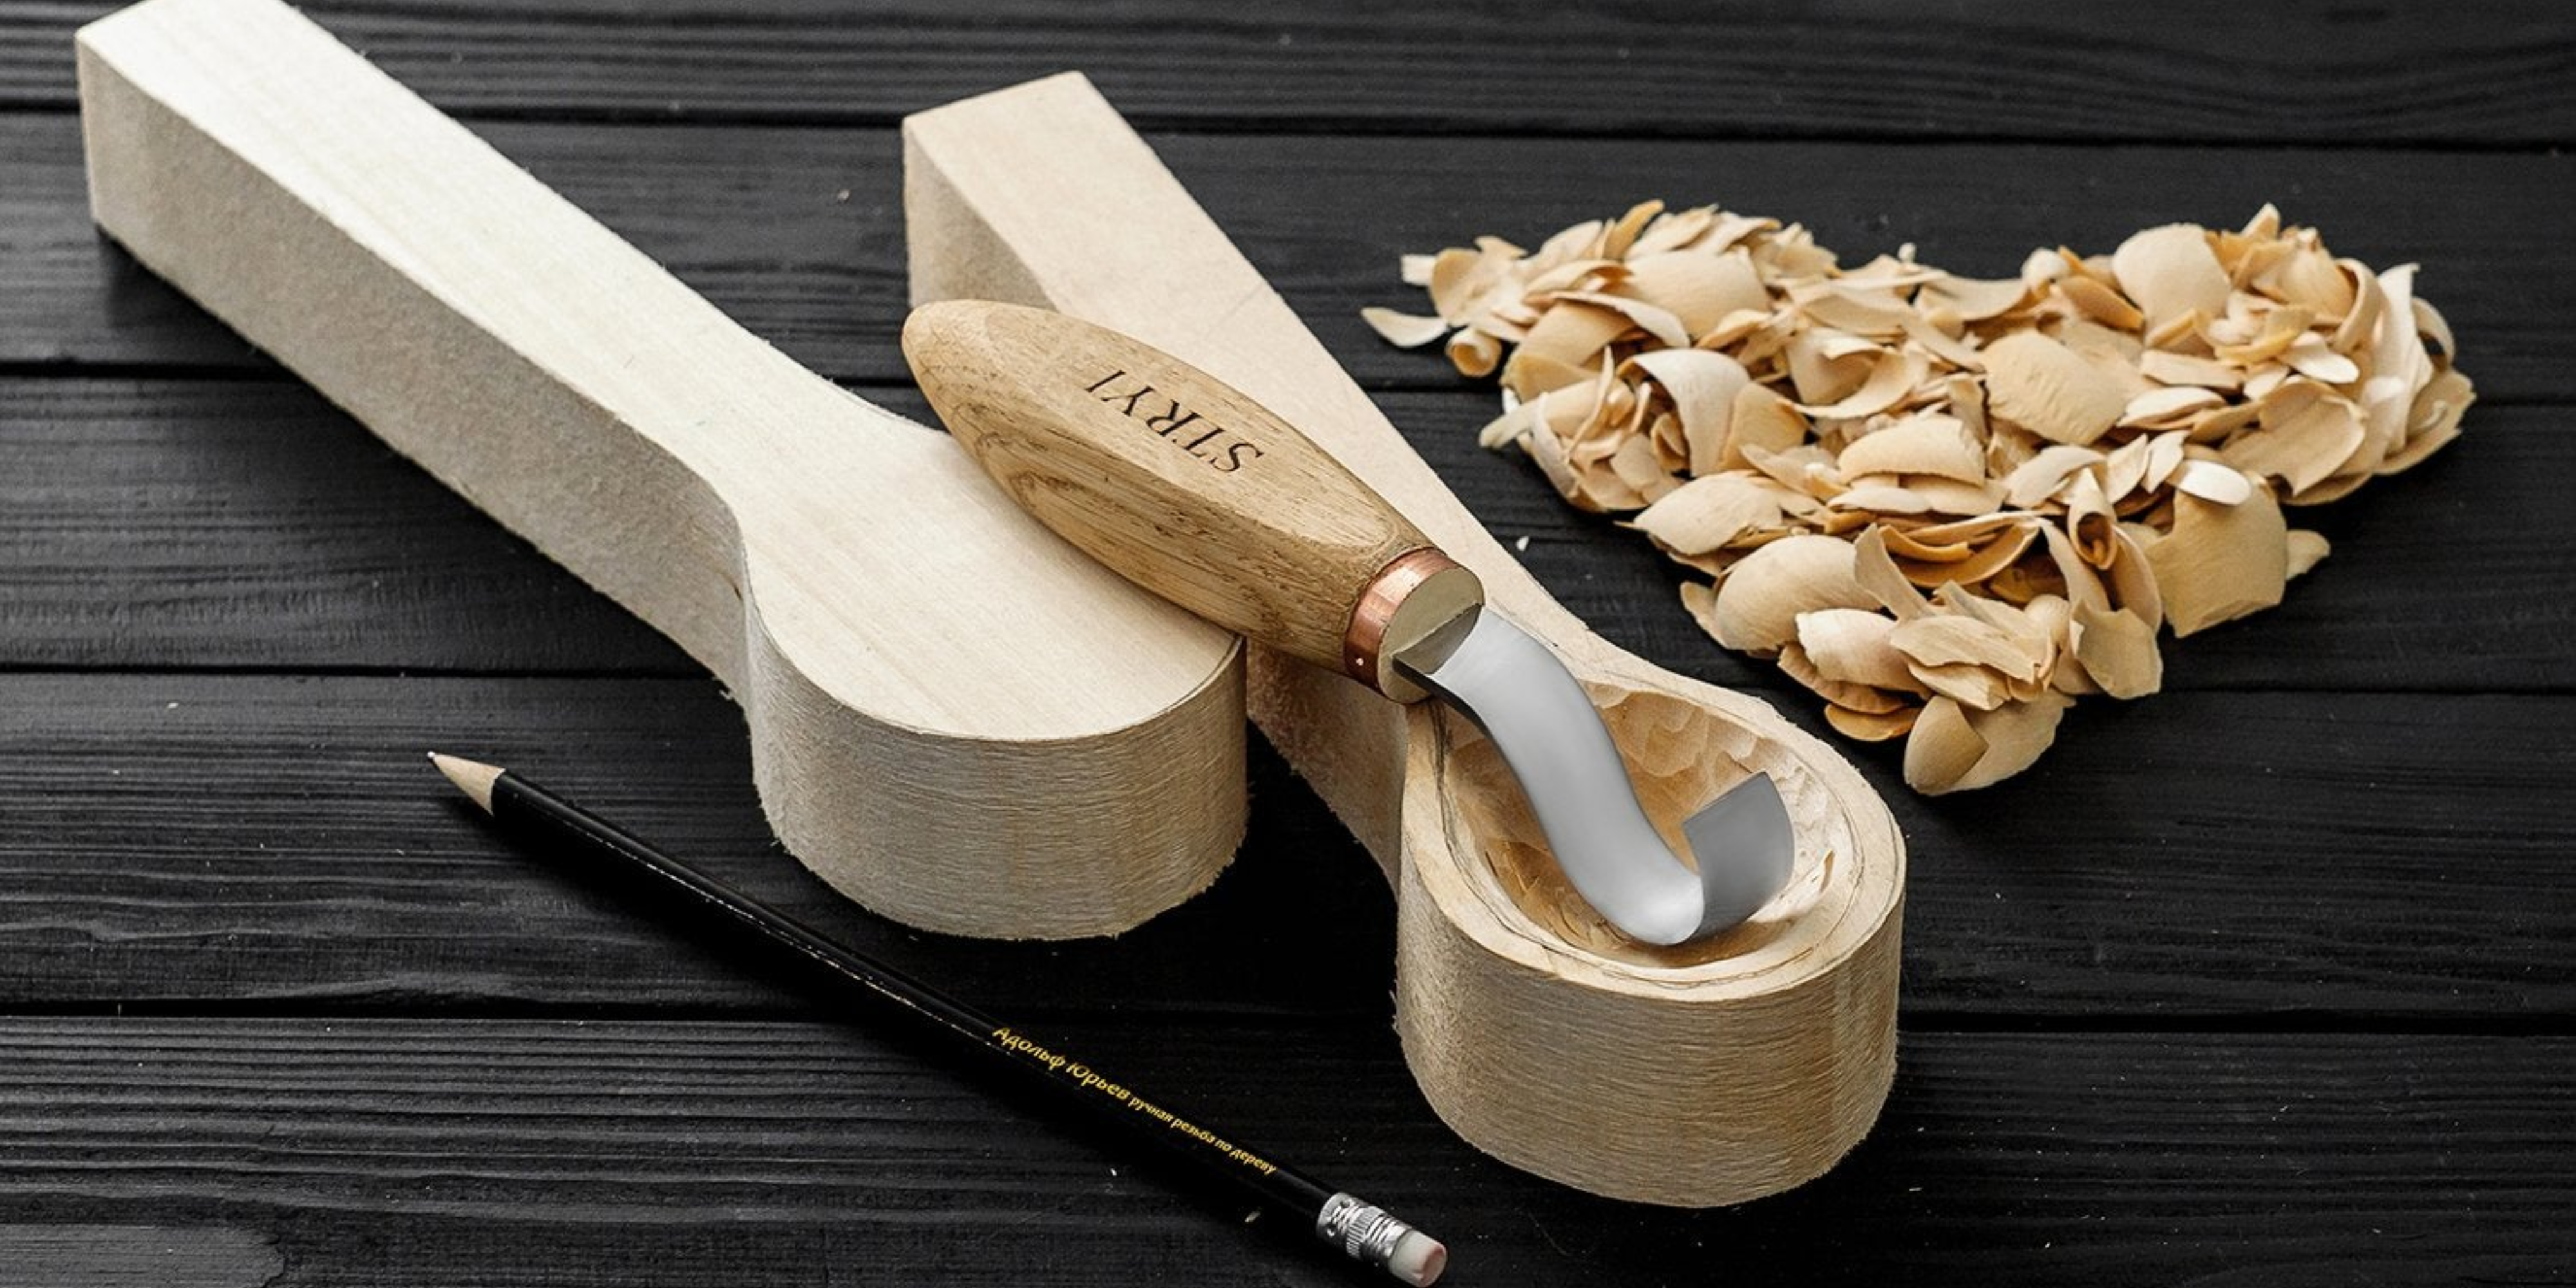 Mora Wood Carving Knife: Unlock Your Carving Potential!